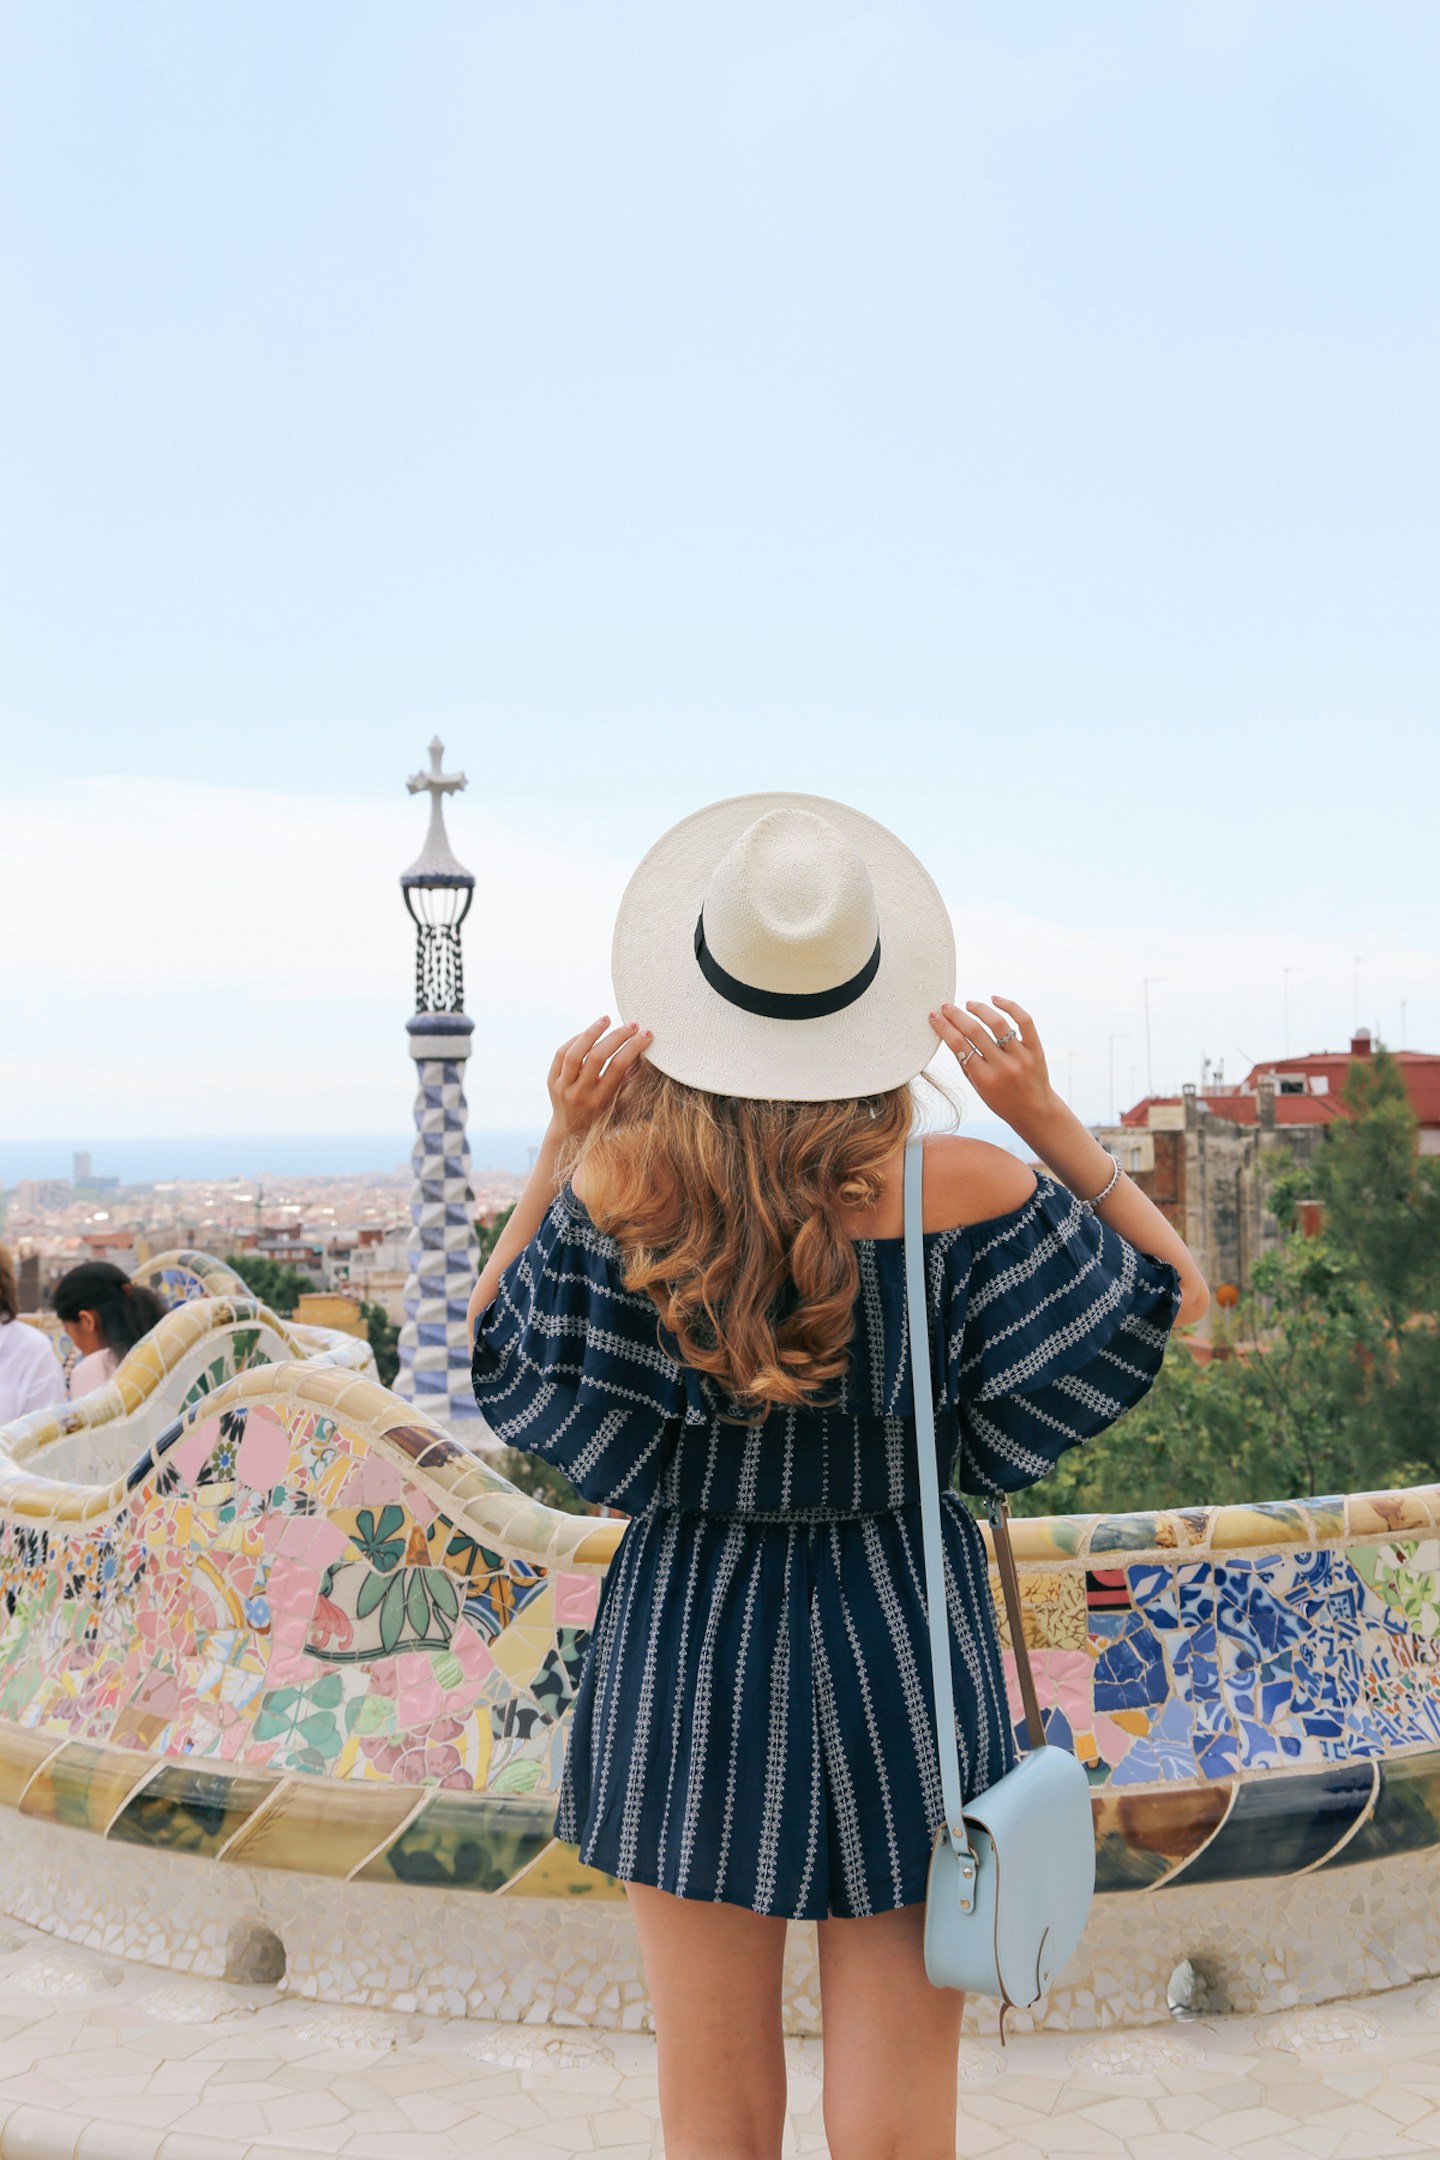 Travel Guide to Park Guell